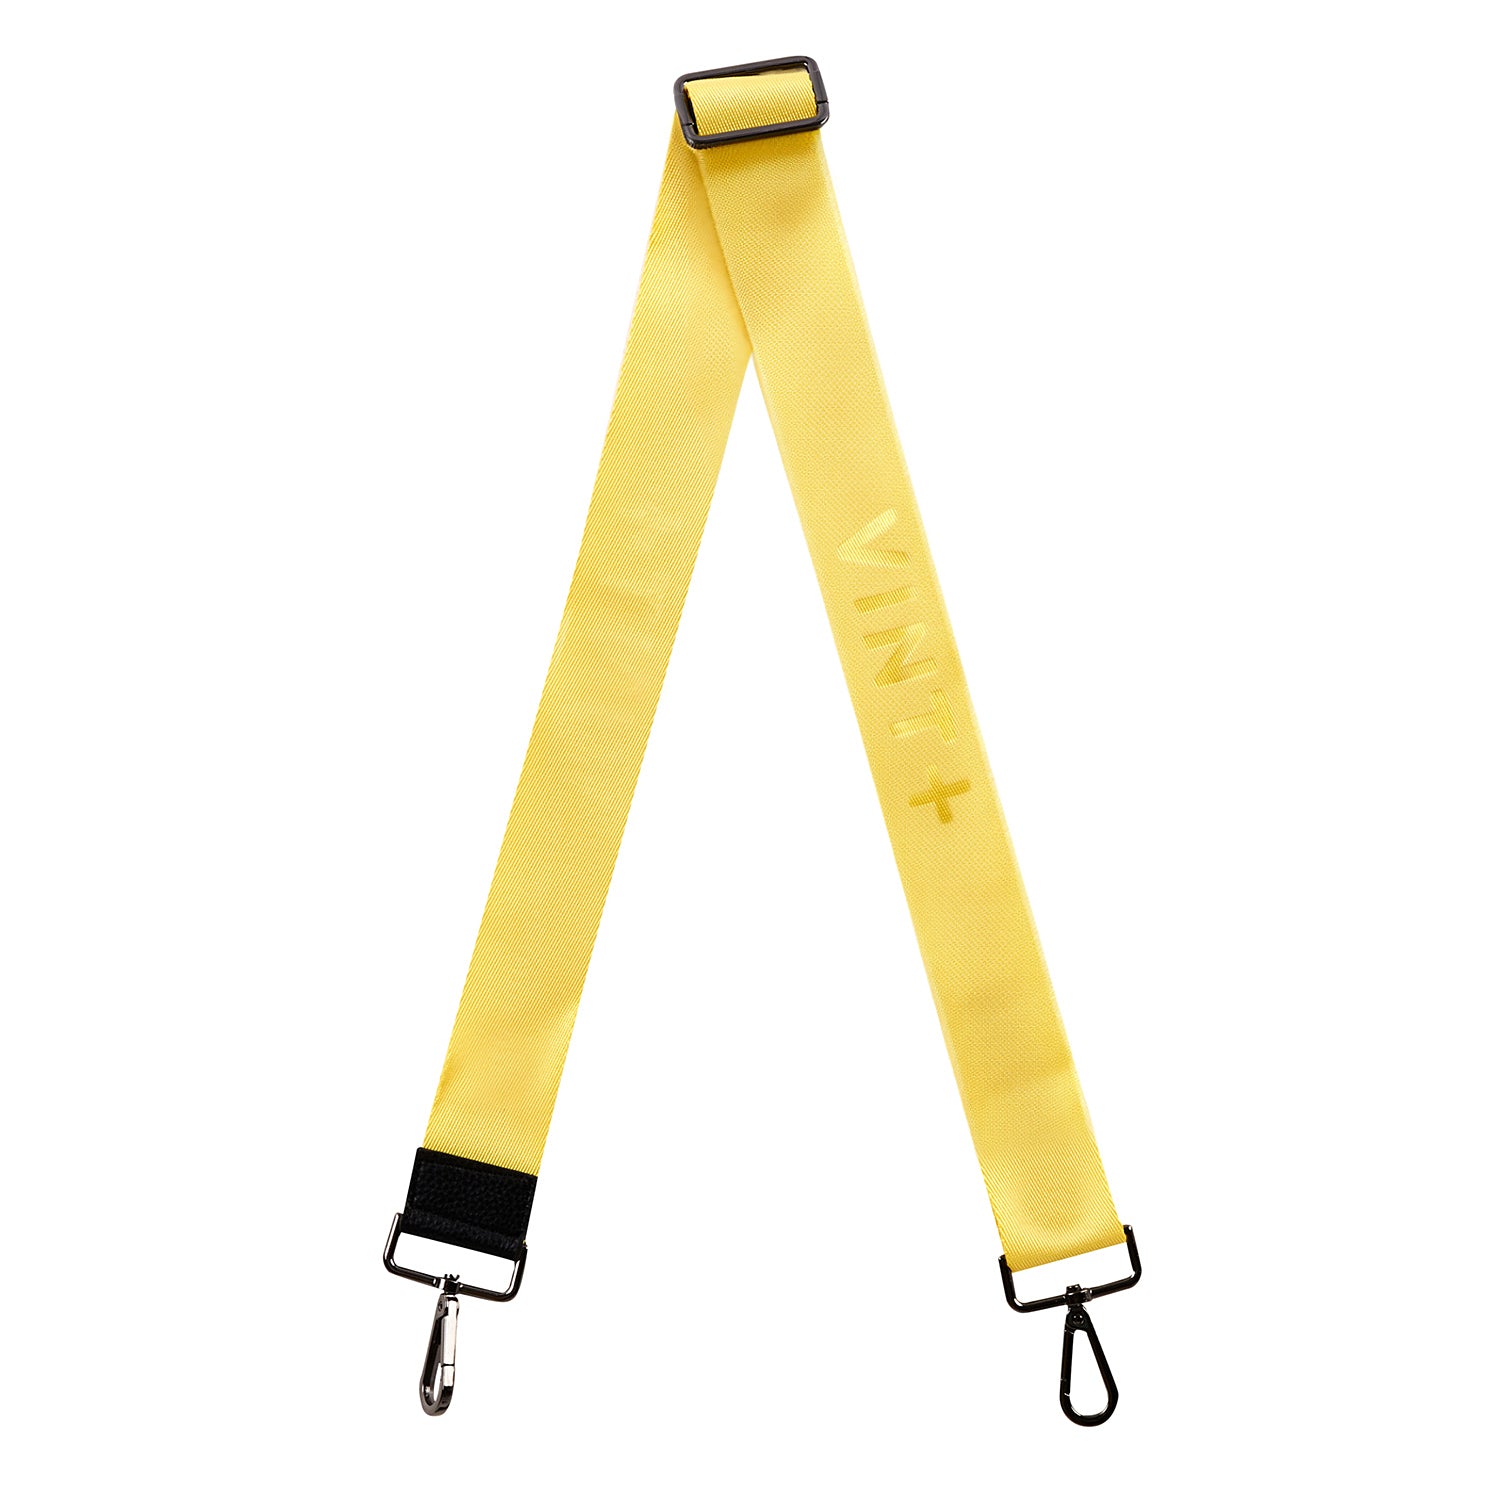 CARRY STRAP - YELLOW